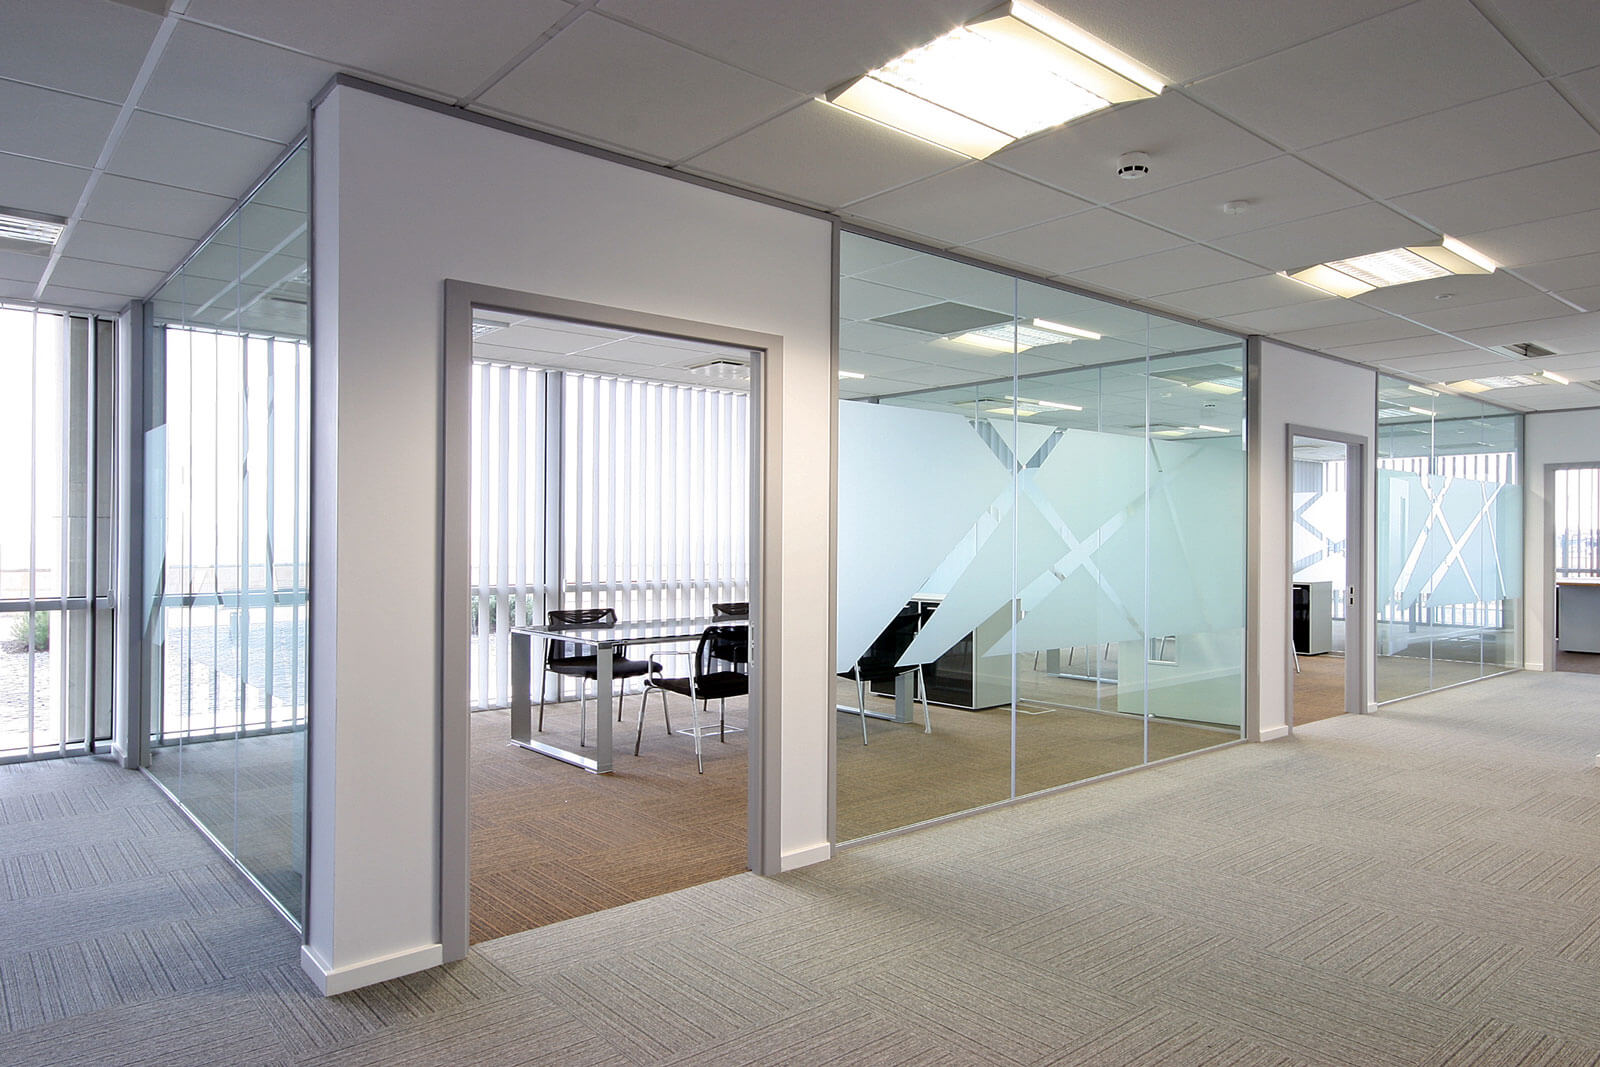 All-glass partitions with doors